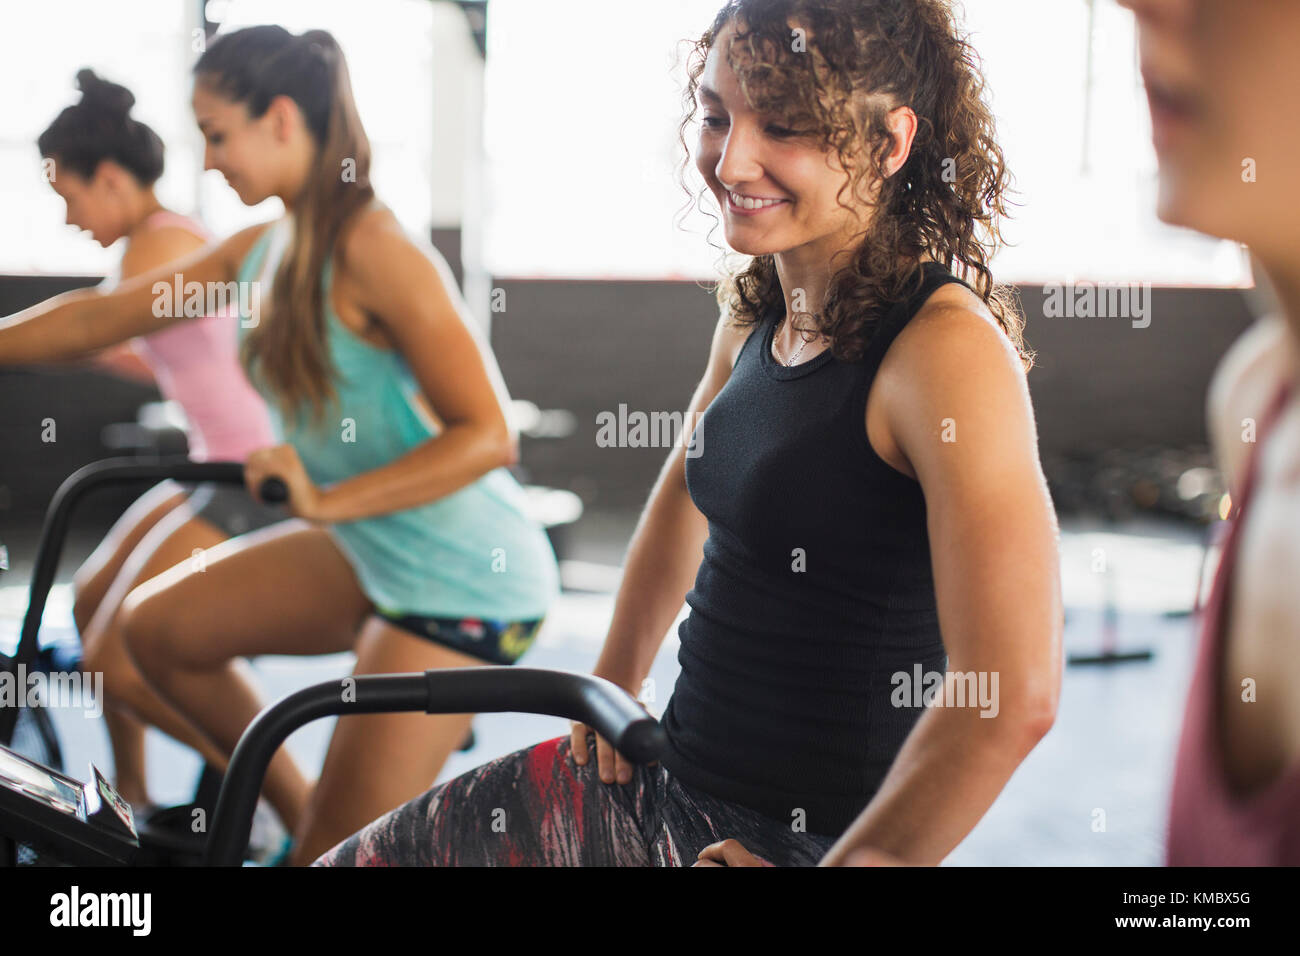 Smiling young woman riding elliptical bike in exercise class Stock Photo